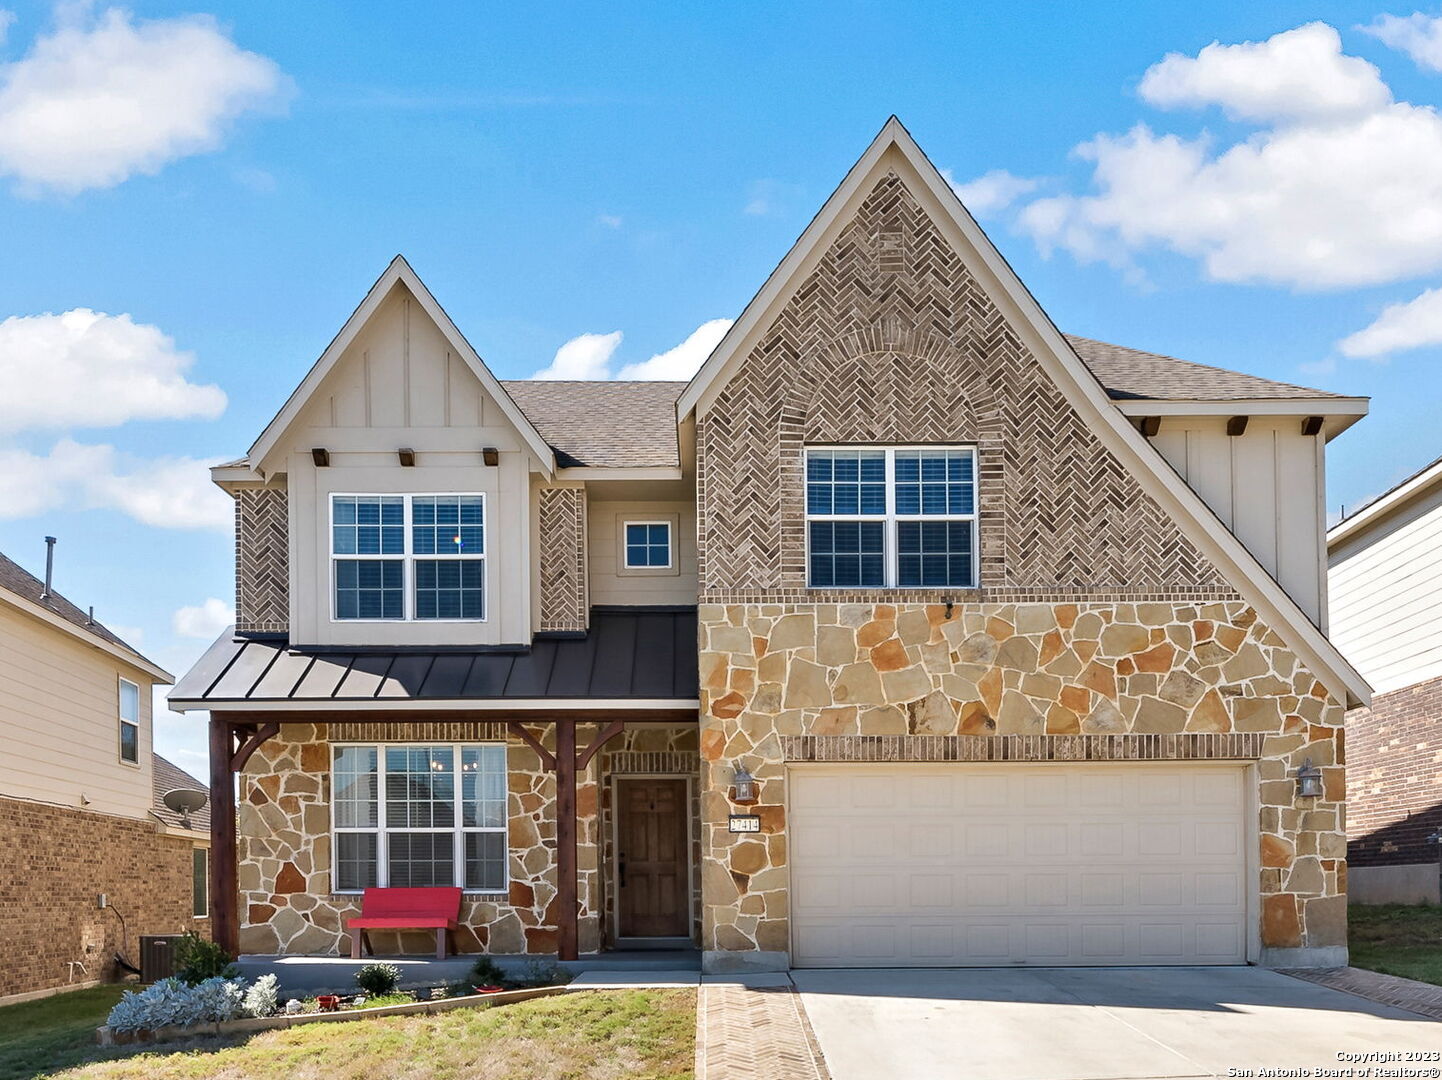 Photo of 27414 Valle Blf in Boerne, TX